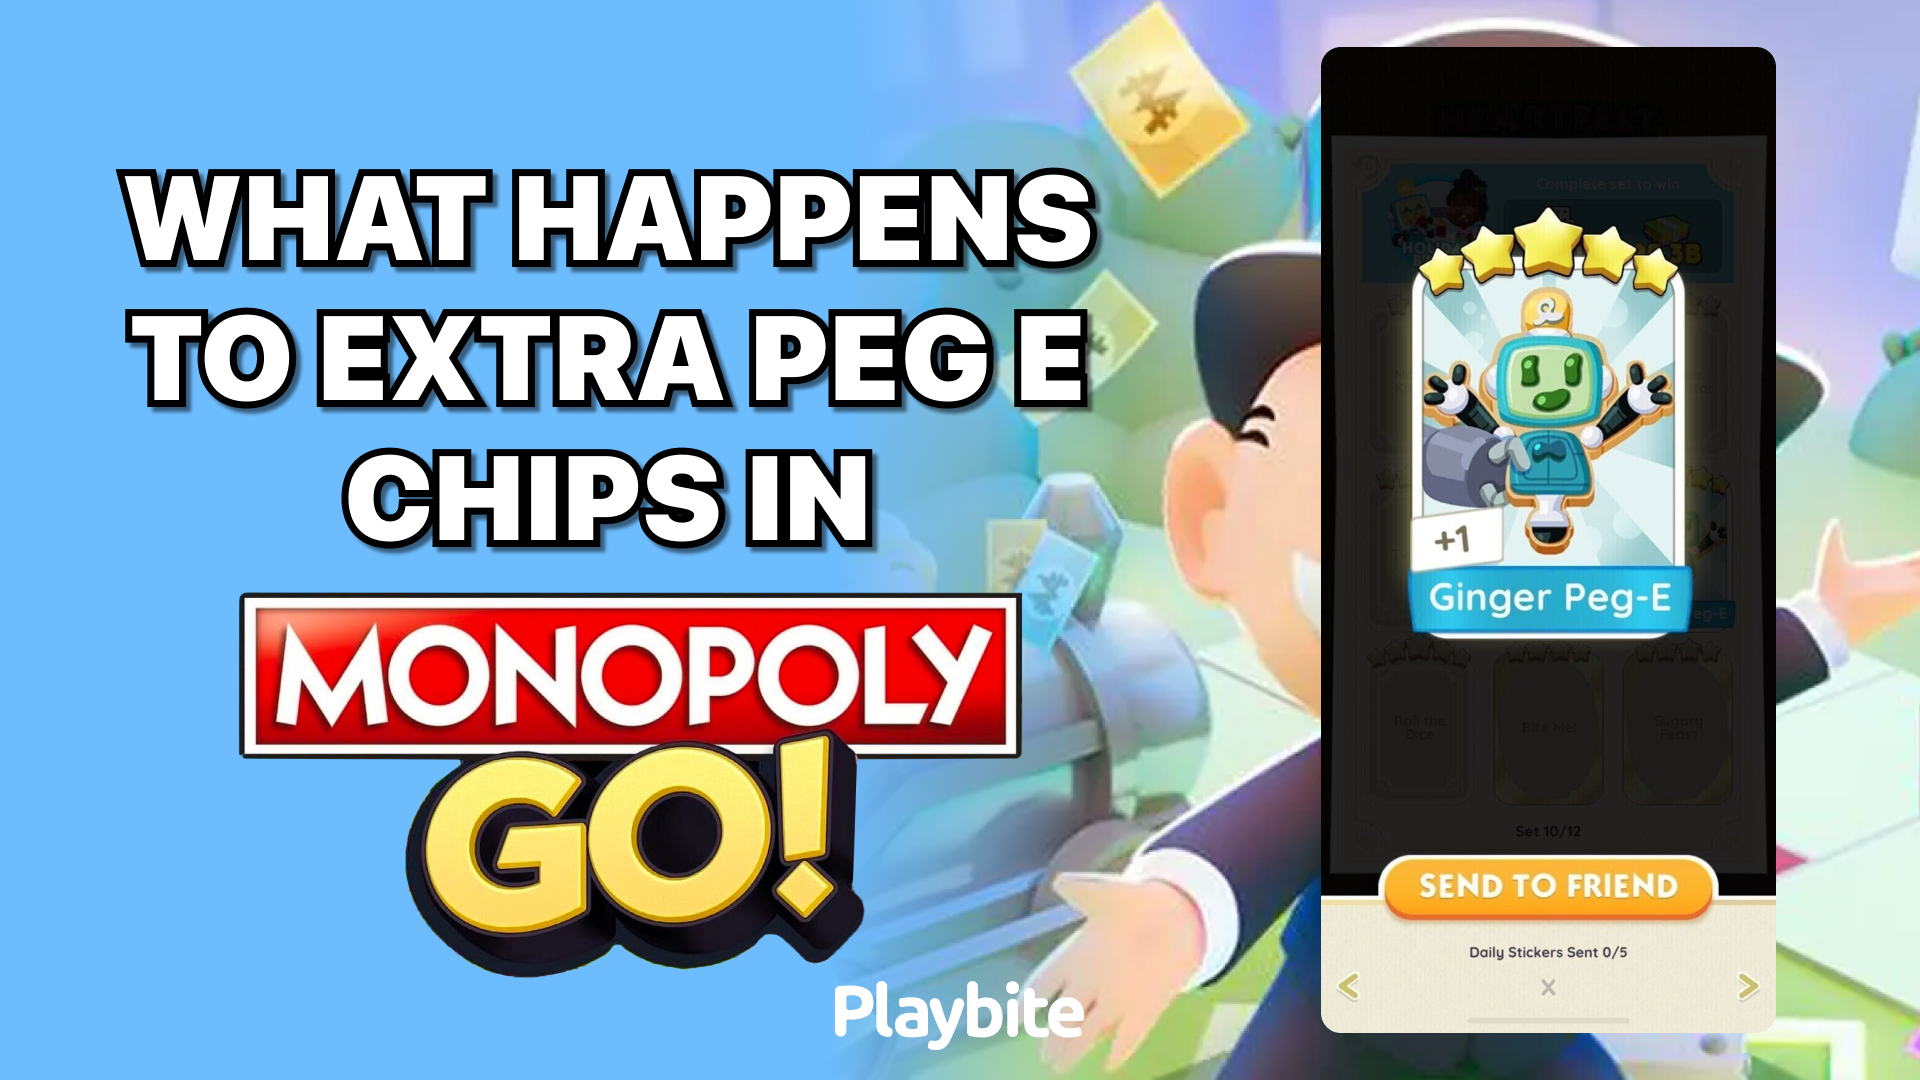 What Happens to Extra Peg E Chips in Monopoly Go?